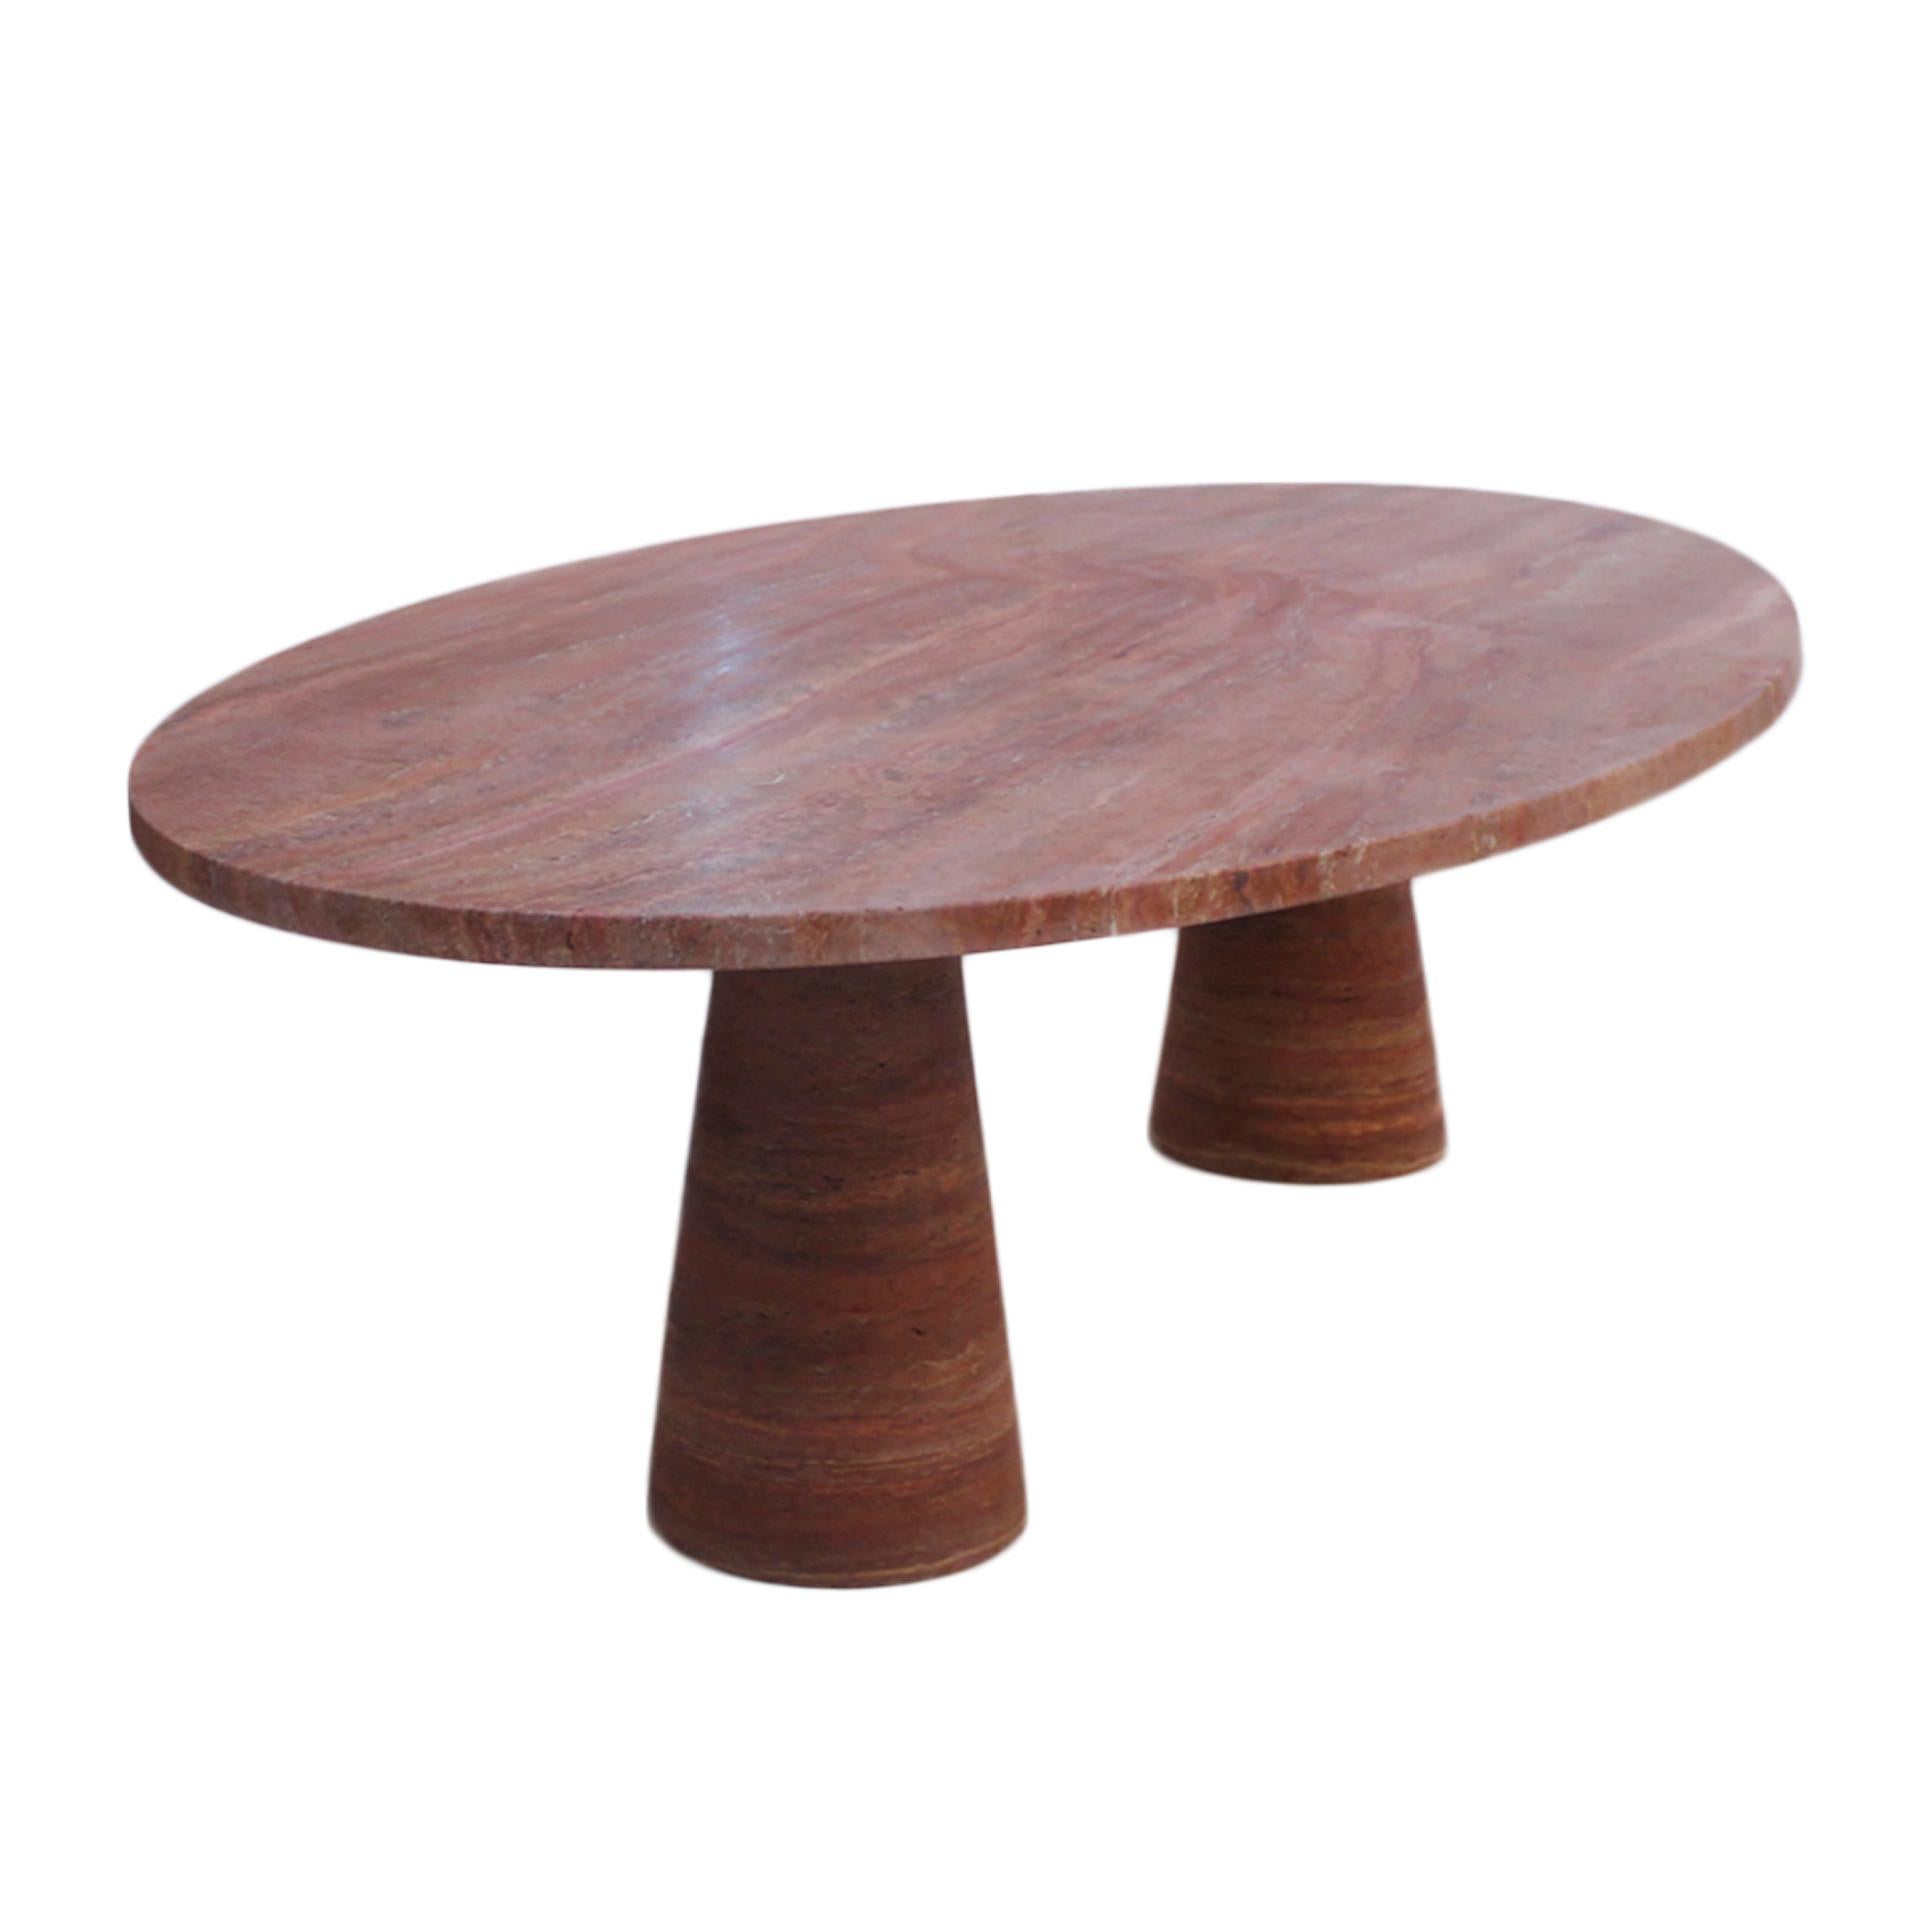 Late 20th Century Italian Red Marble Persa Dining Table with Oval Top and Rounded Solid Legs For Sale